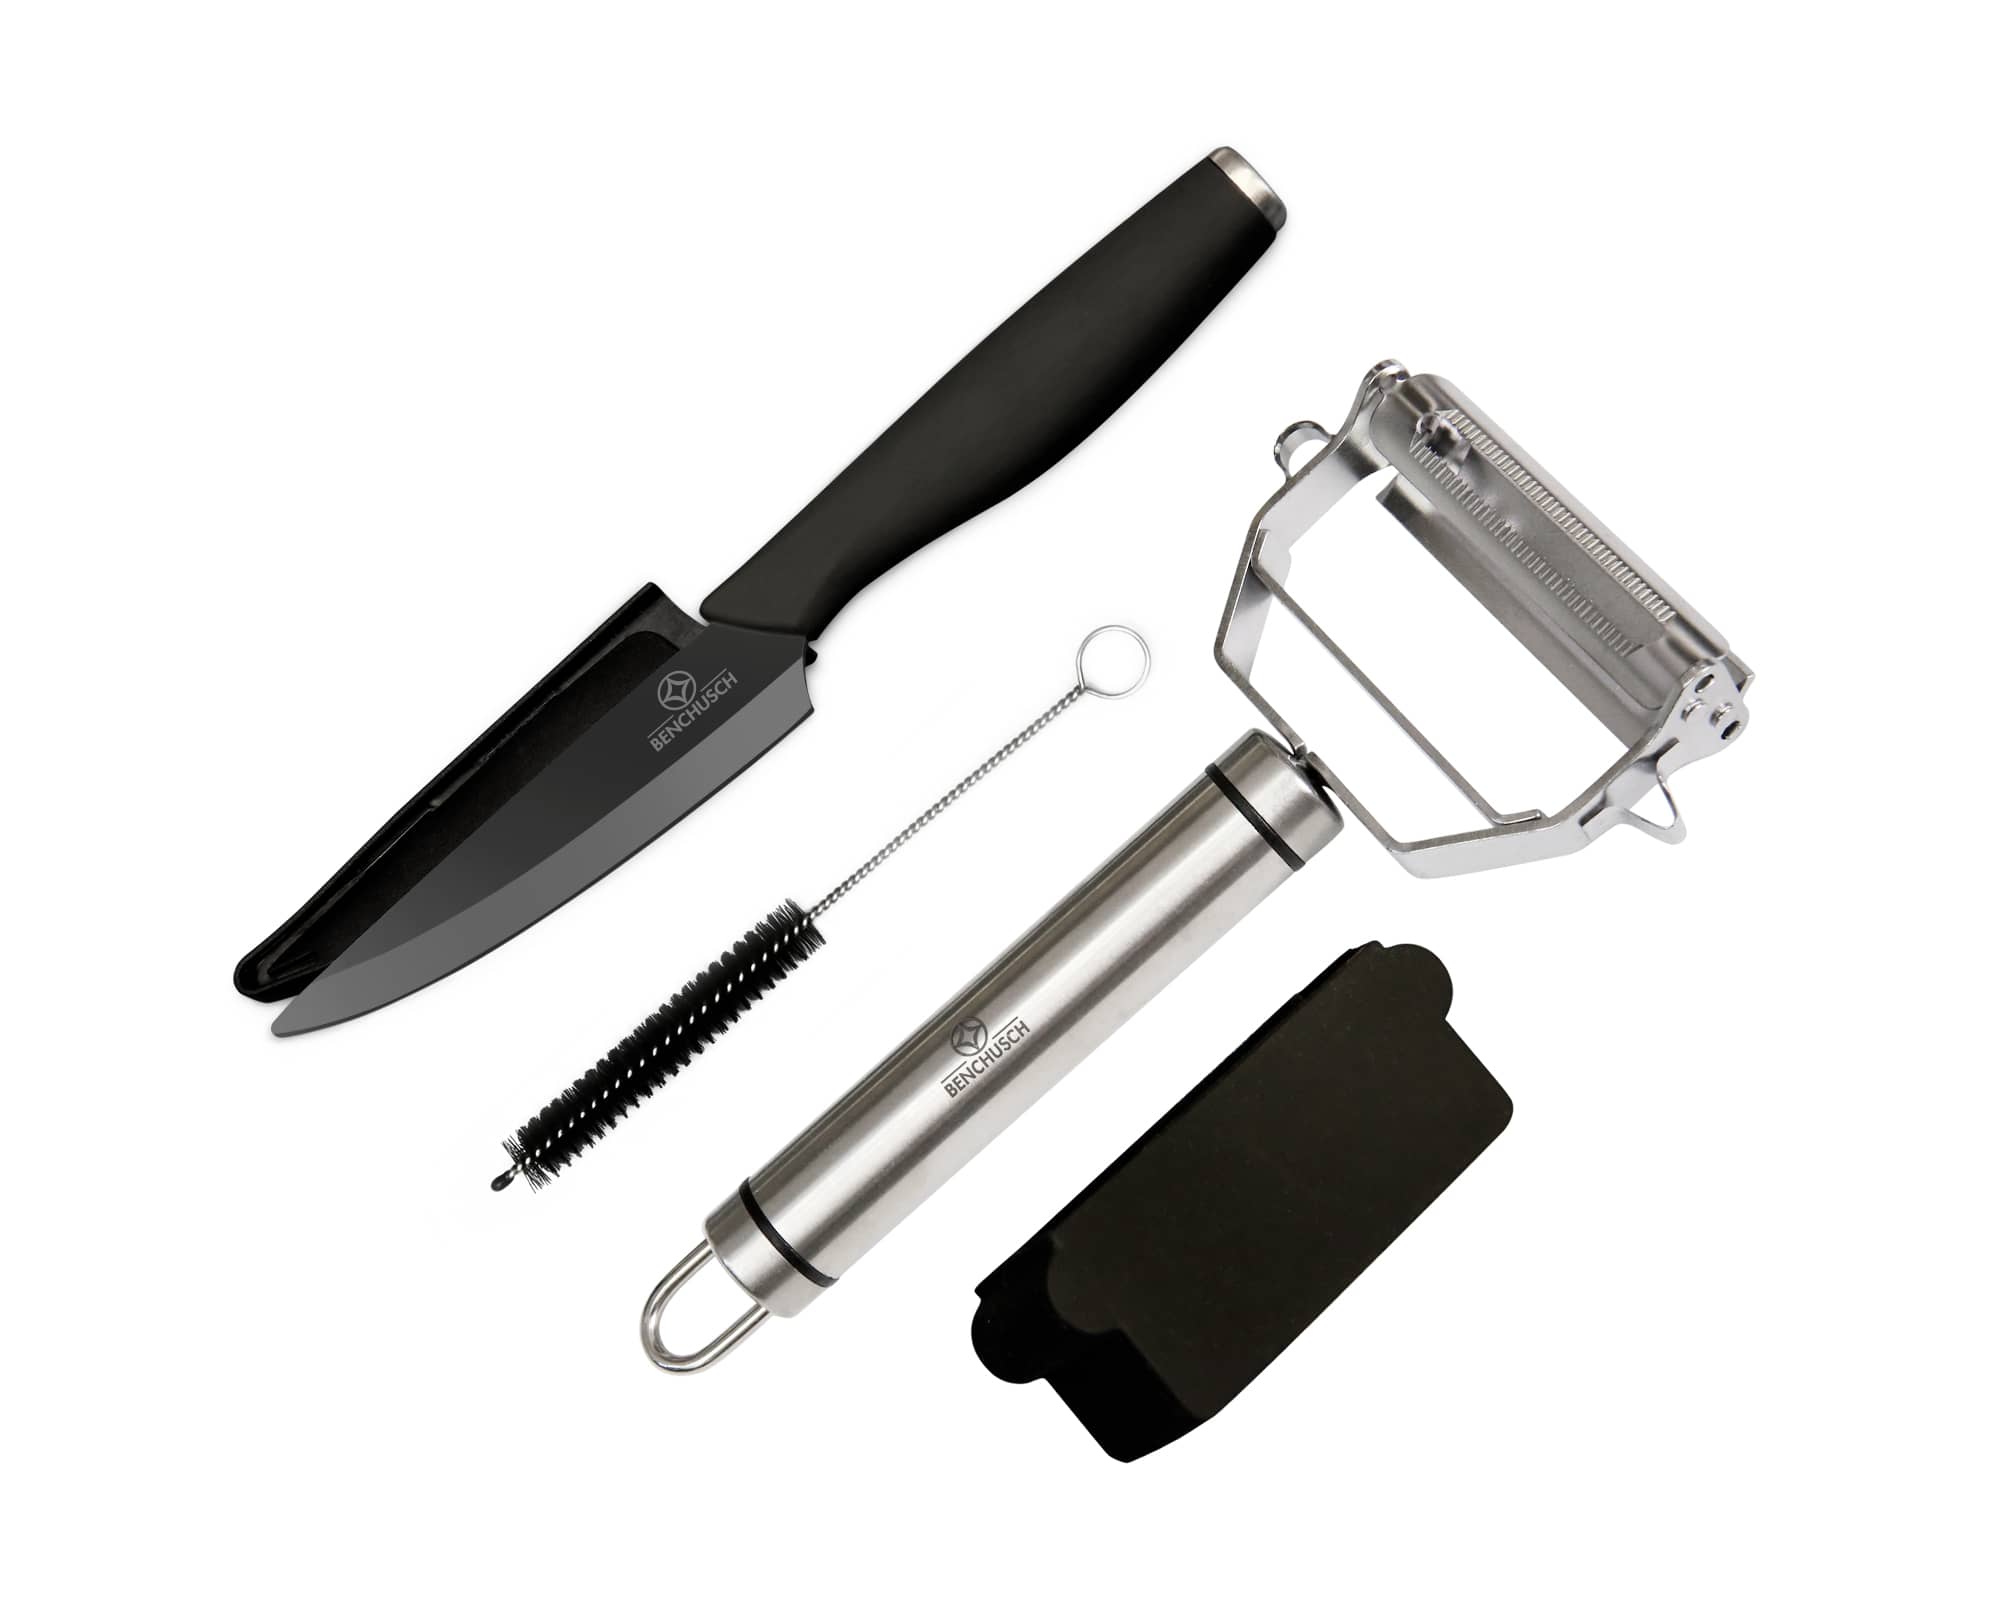 Benchusch Zirconia Series Vegetable Peeler & Ceramic Paring Knife Set, black color with stainless steel blade, rubber cover